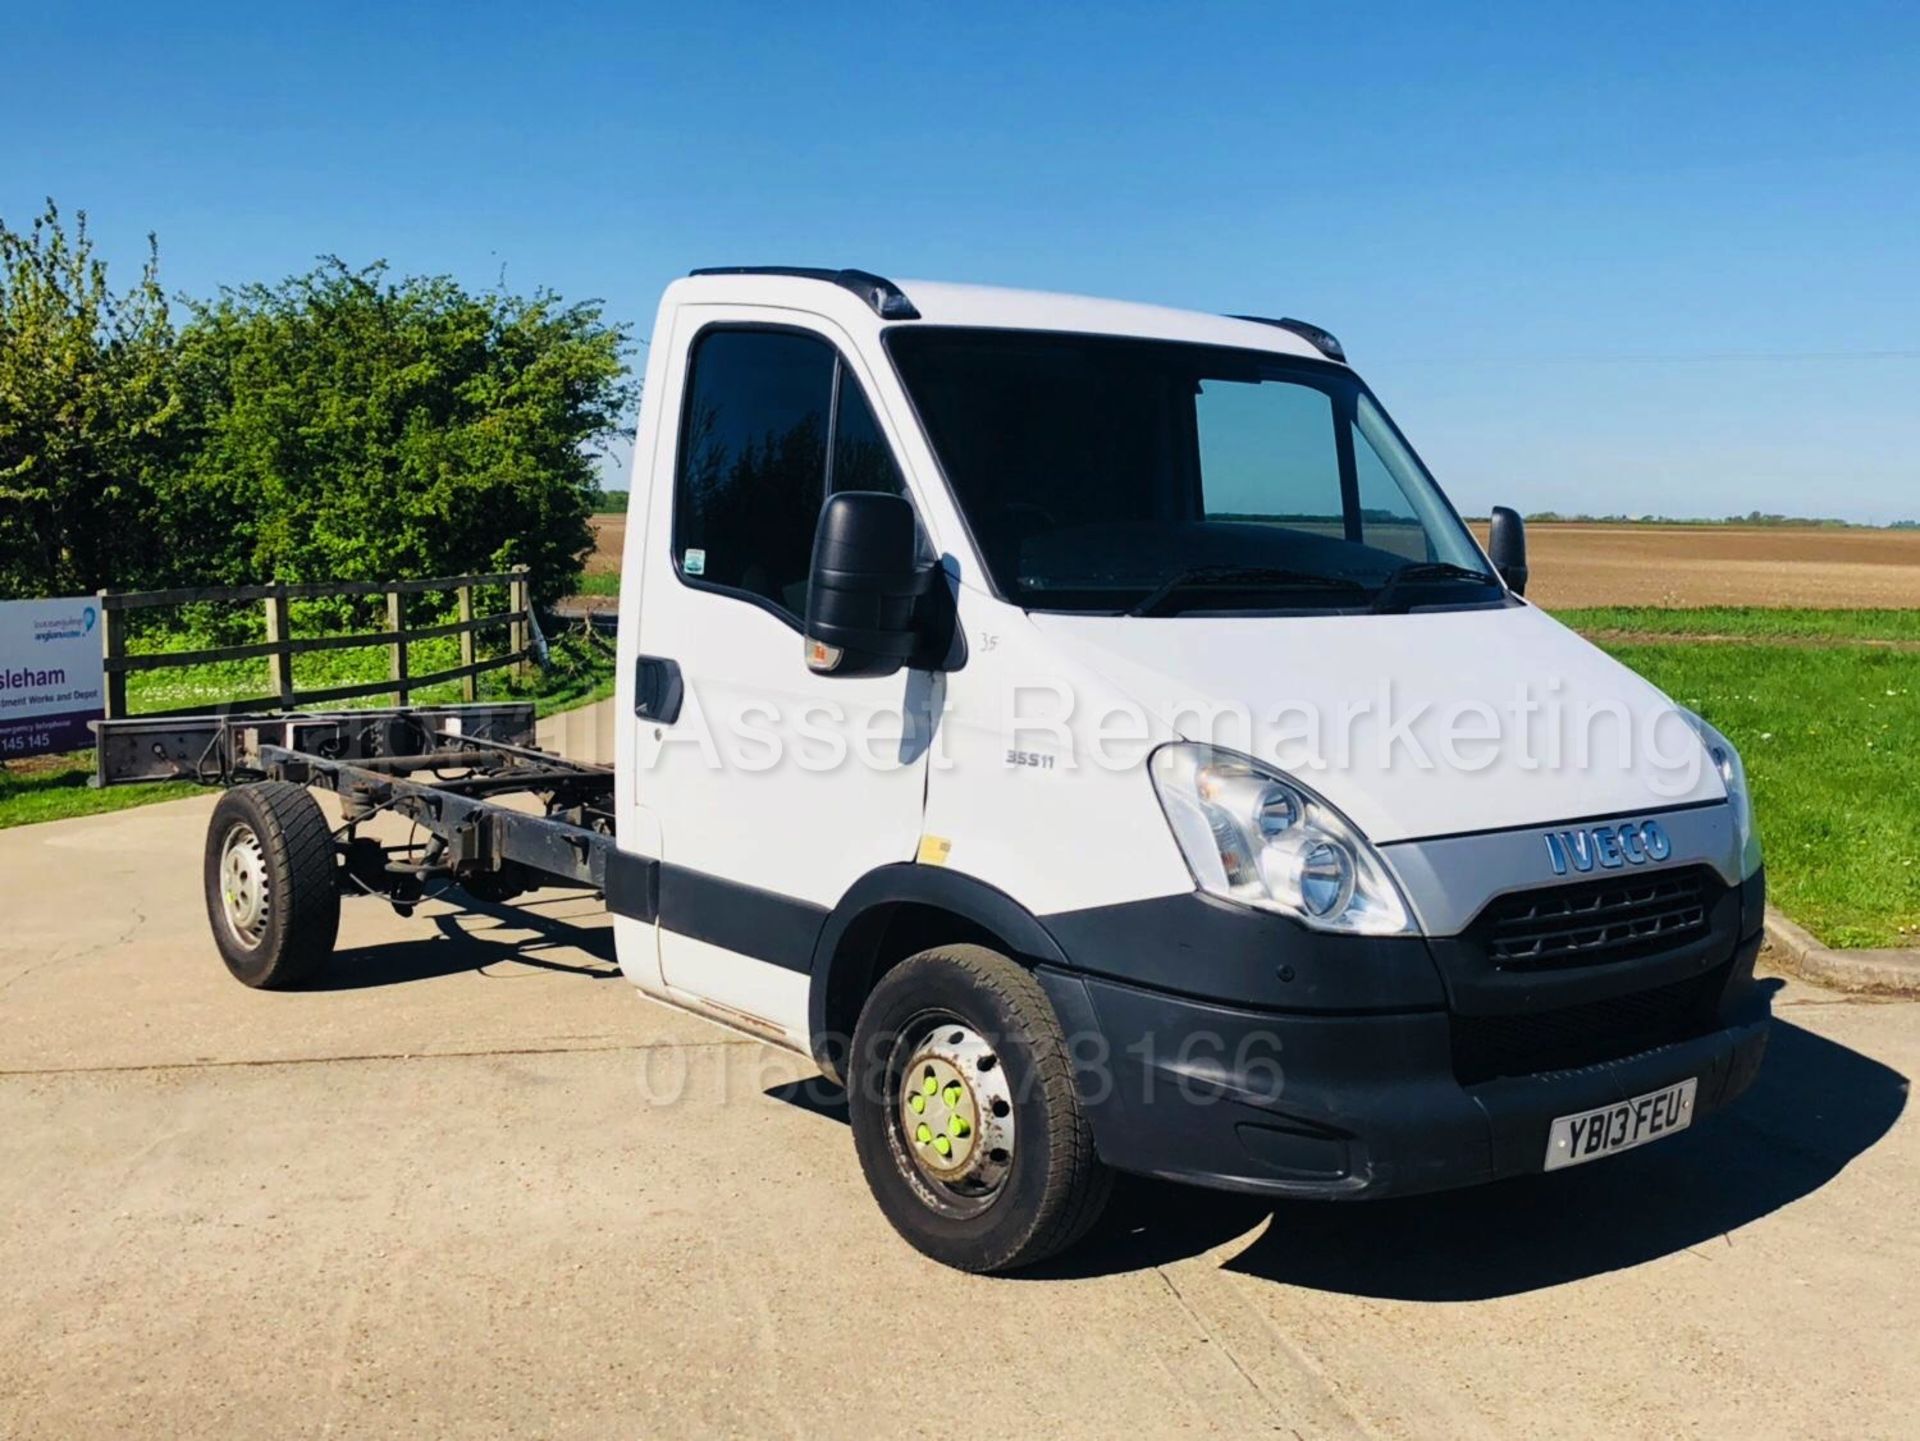 On Sale IVECO DAILY 35S11 'LWB - CHASSIS CAB' (2014 MODEL) '2.3 DIESEL - 6 SPEED' (1 OWNER)